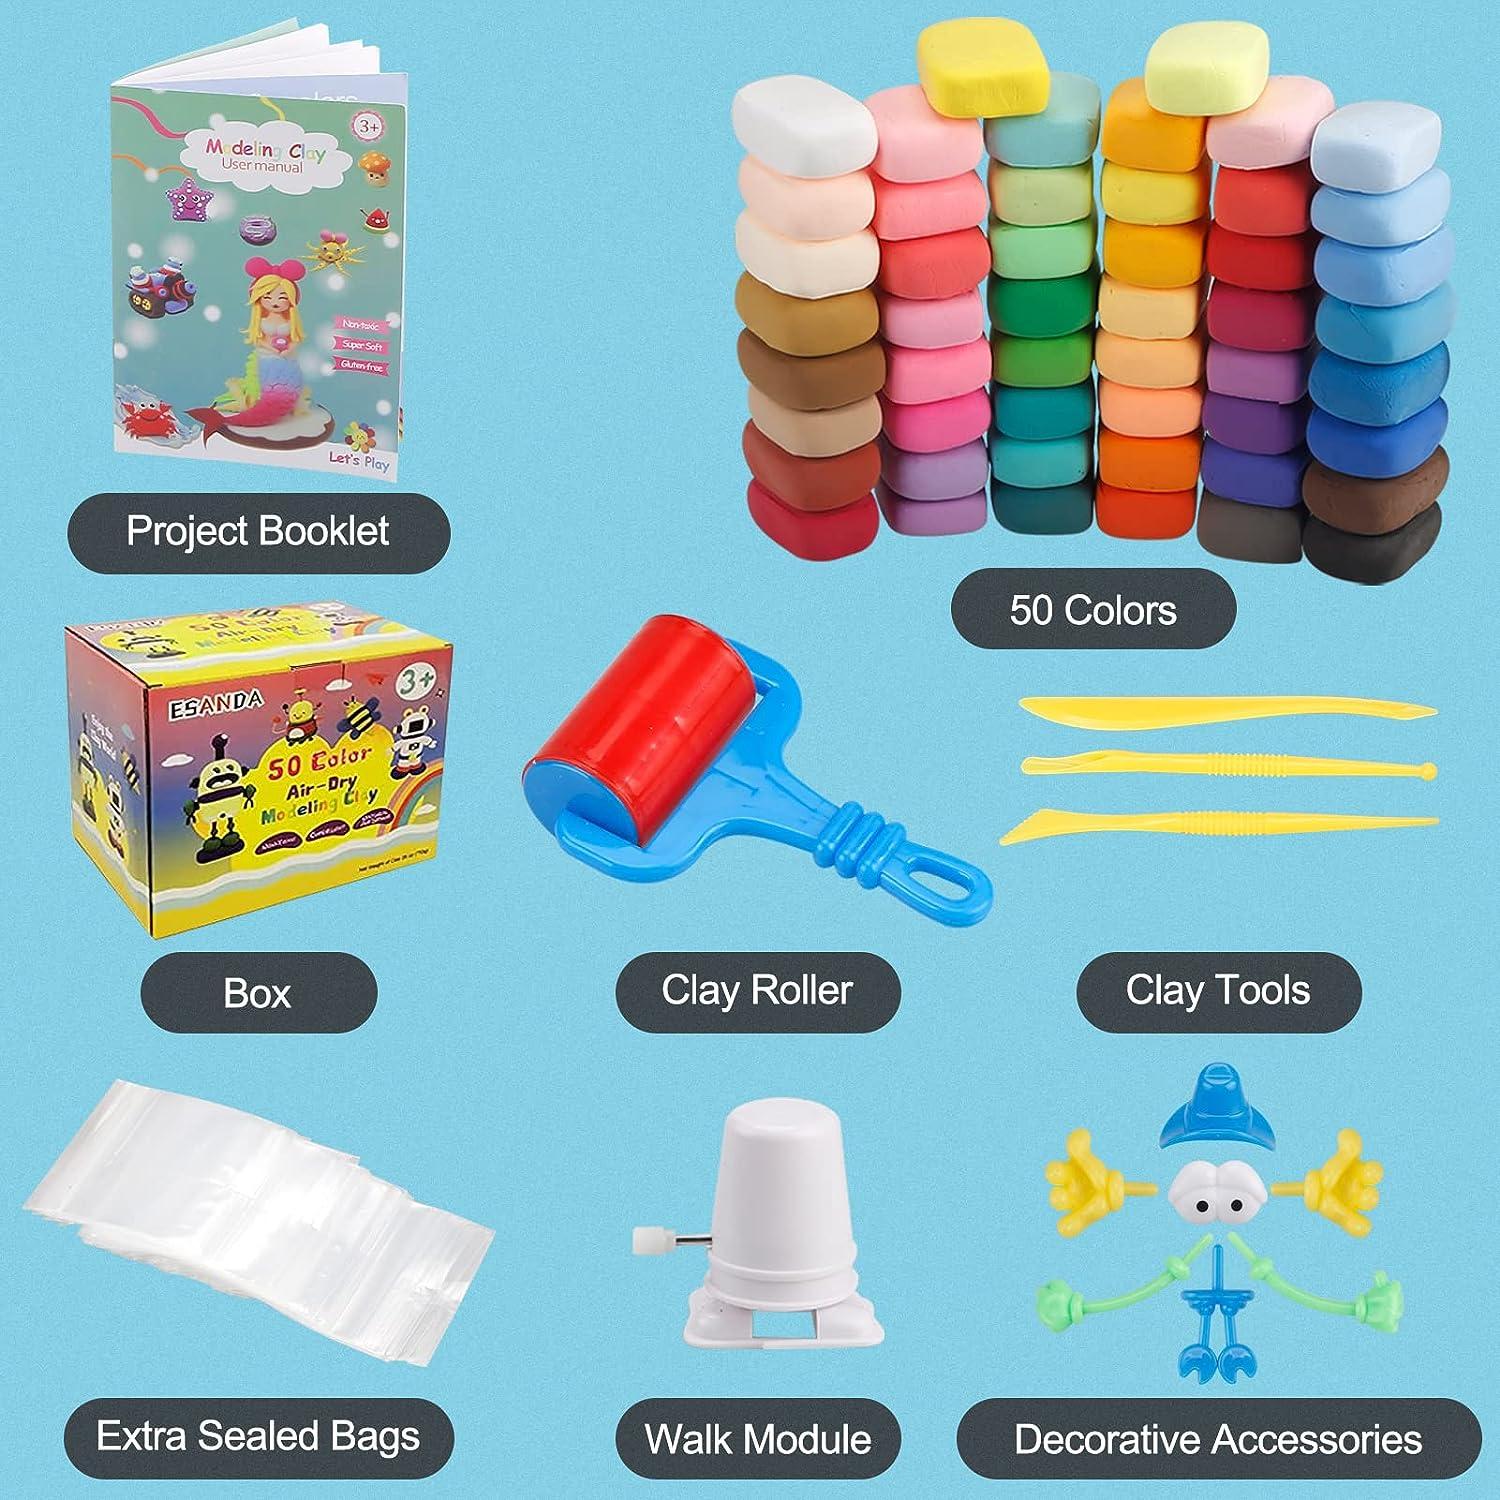 Modeling Clay Kit - 50 Colors Soft & Ultra Light Air Dry Magic Clay with  Sculpting Tools Safe & Non-Toxic Great Gift for Kids.